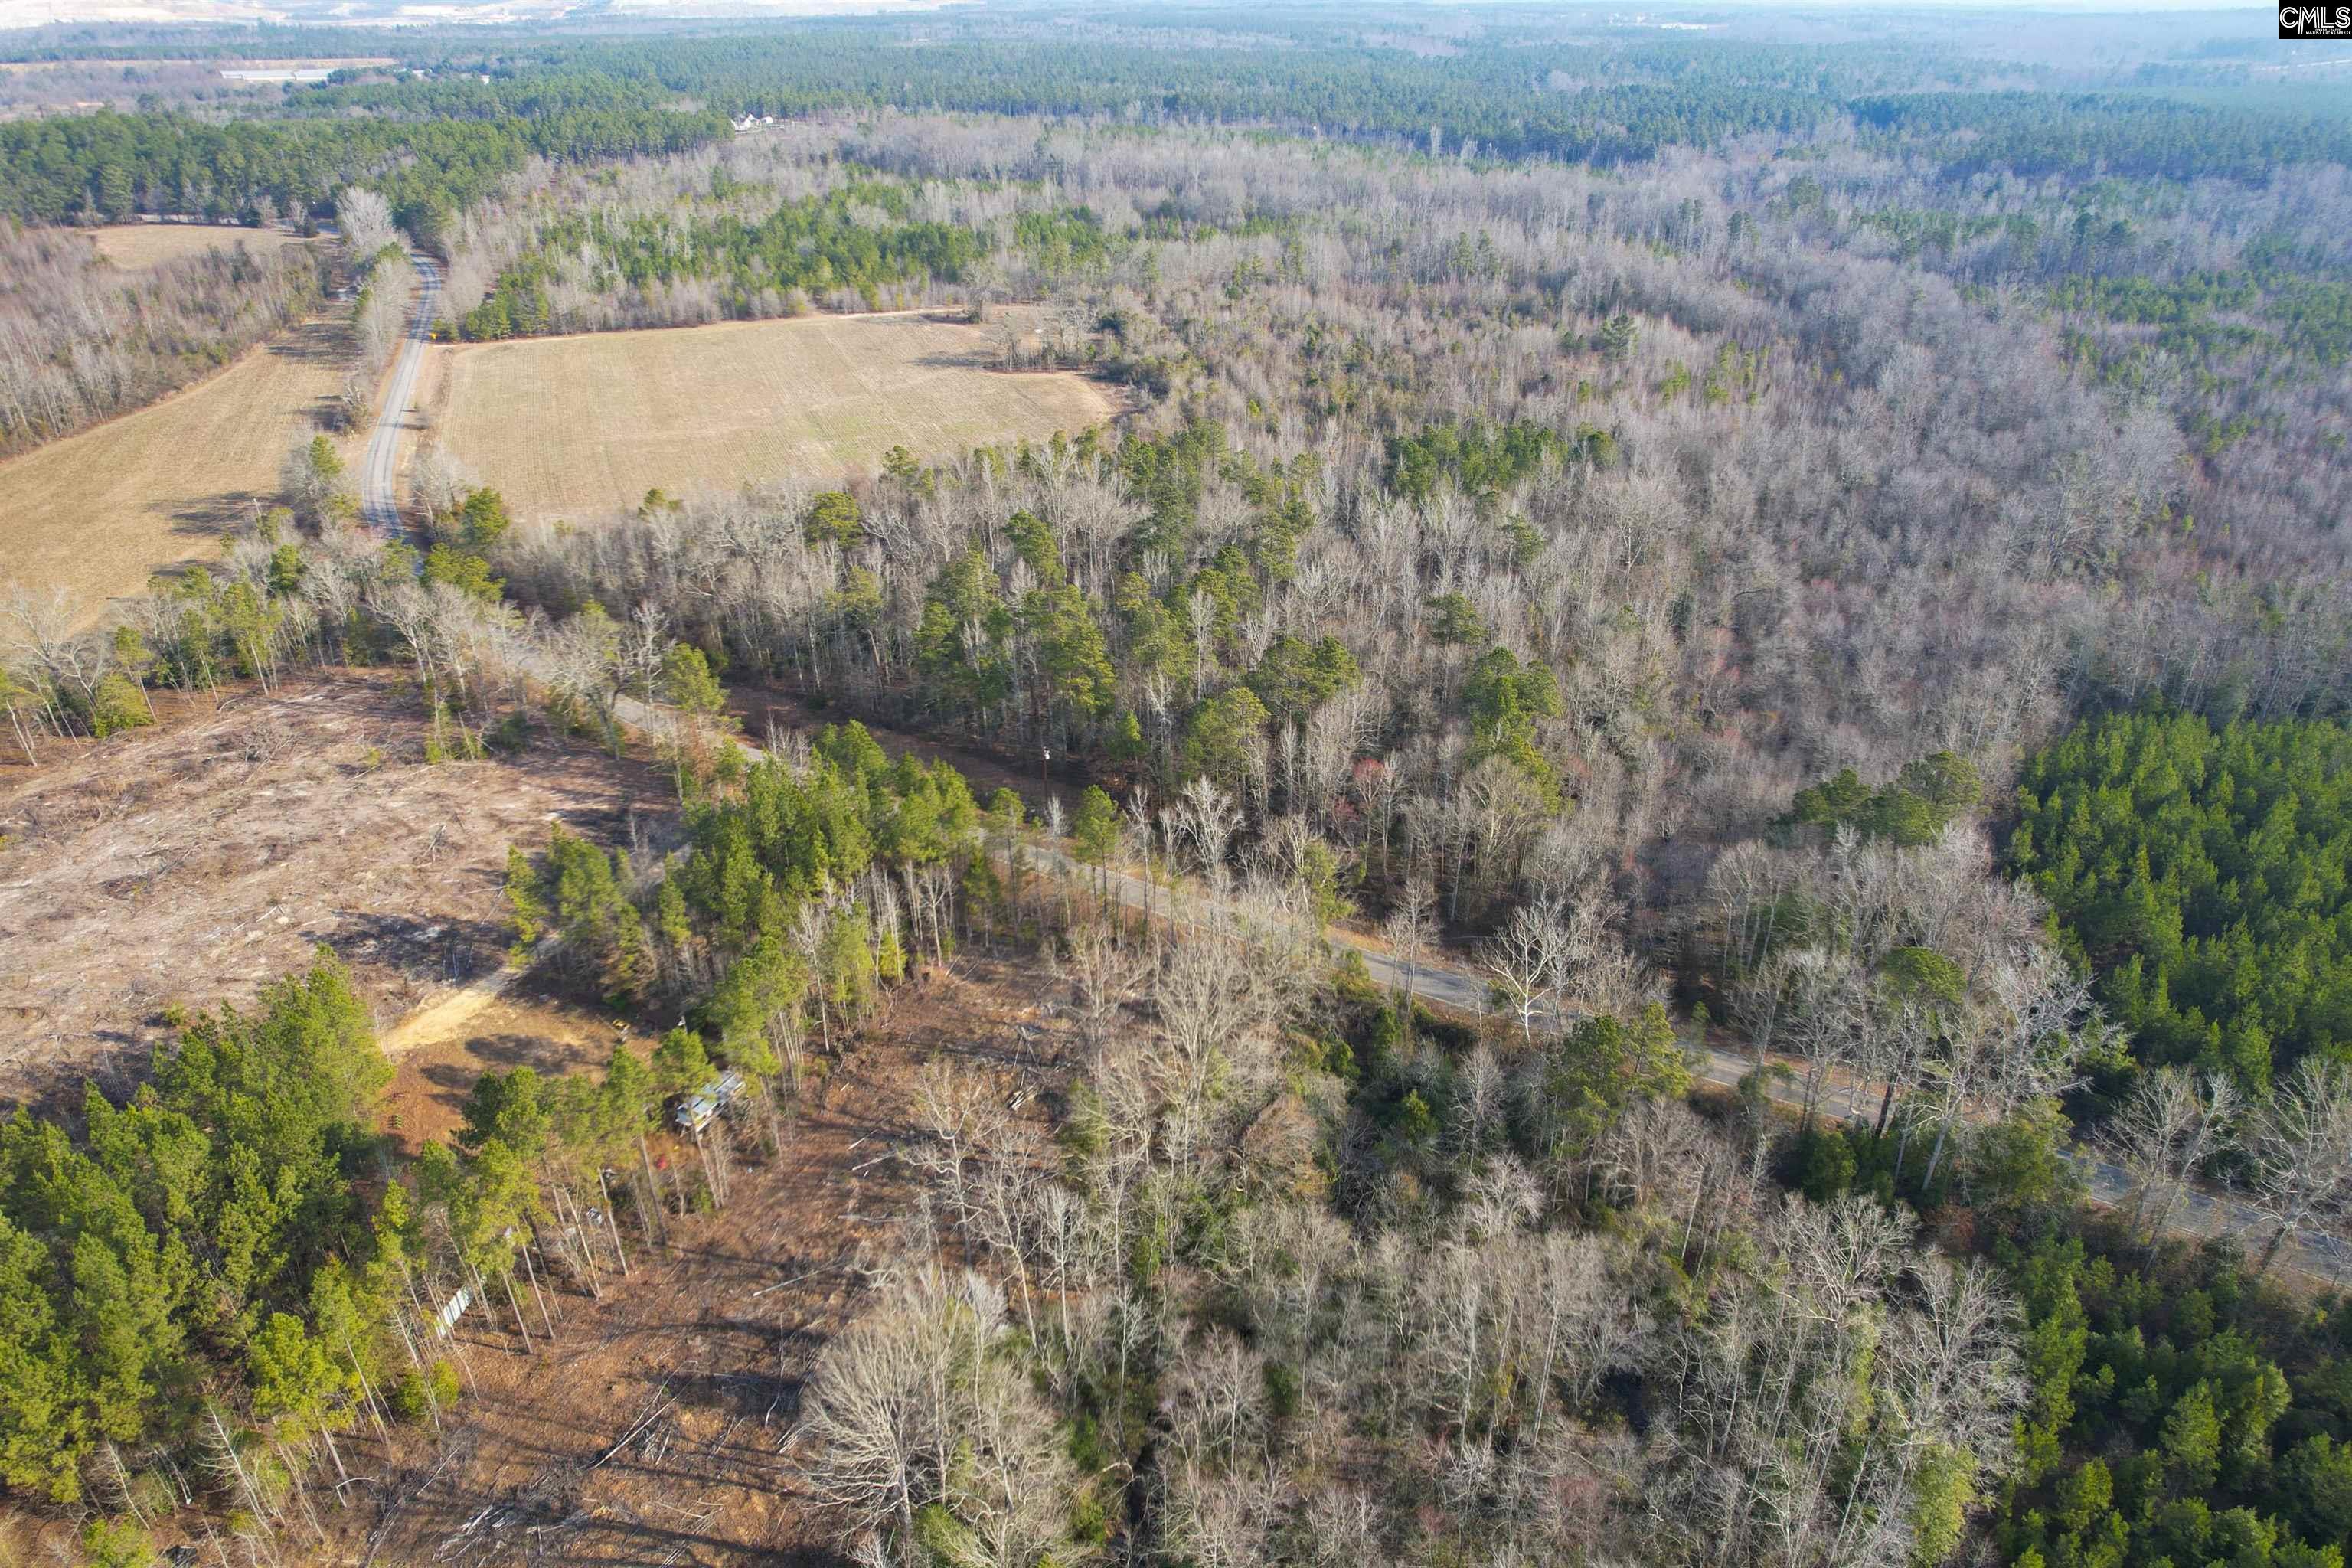  Lots For Sale - 703 Neds Creek, Kershaw, SC - 27 